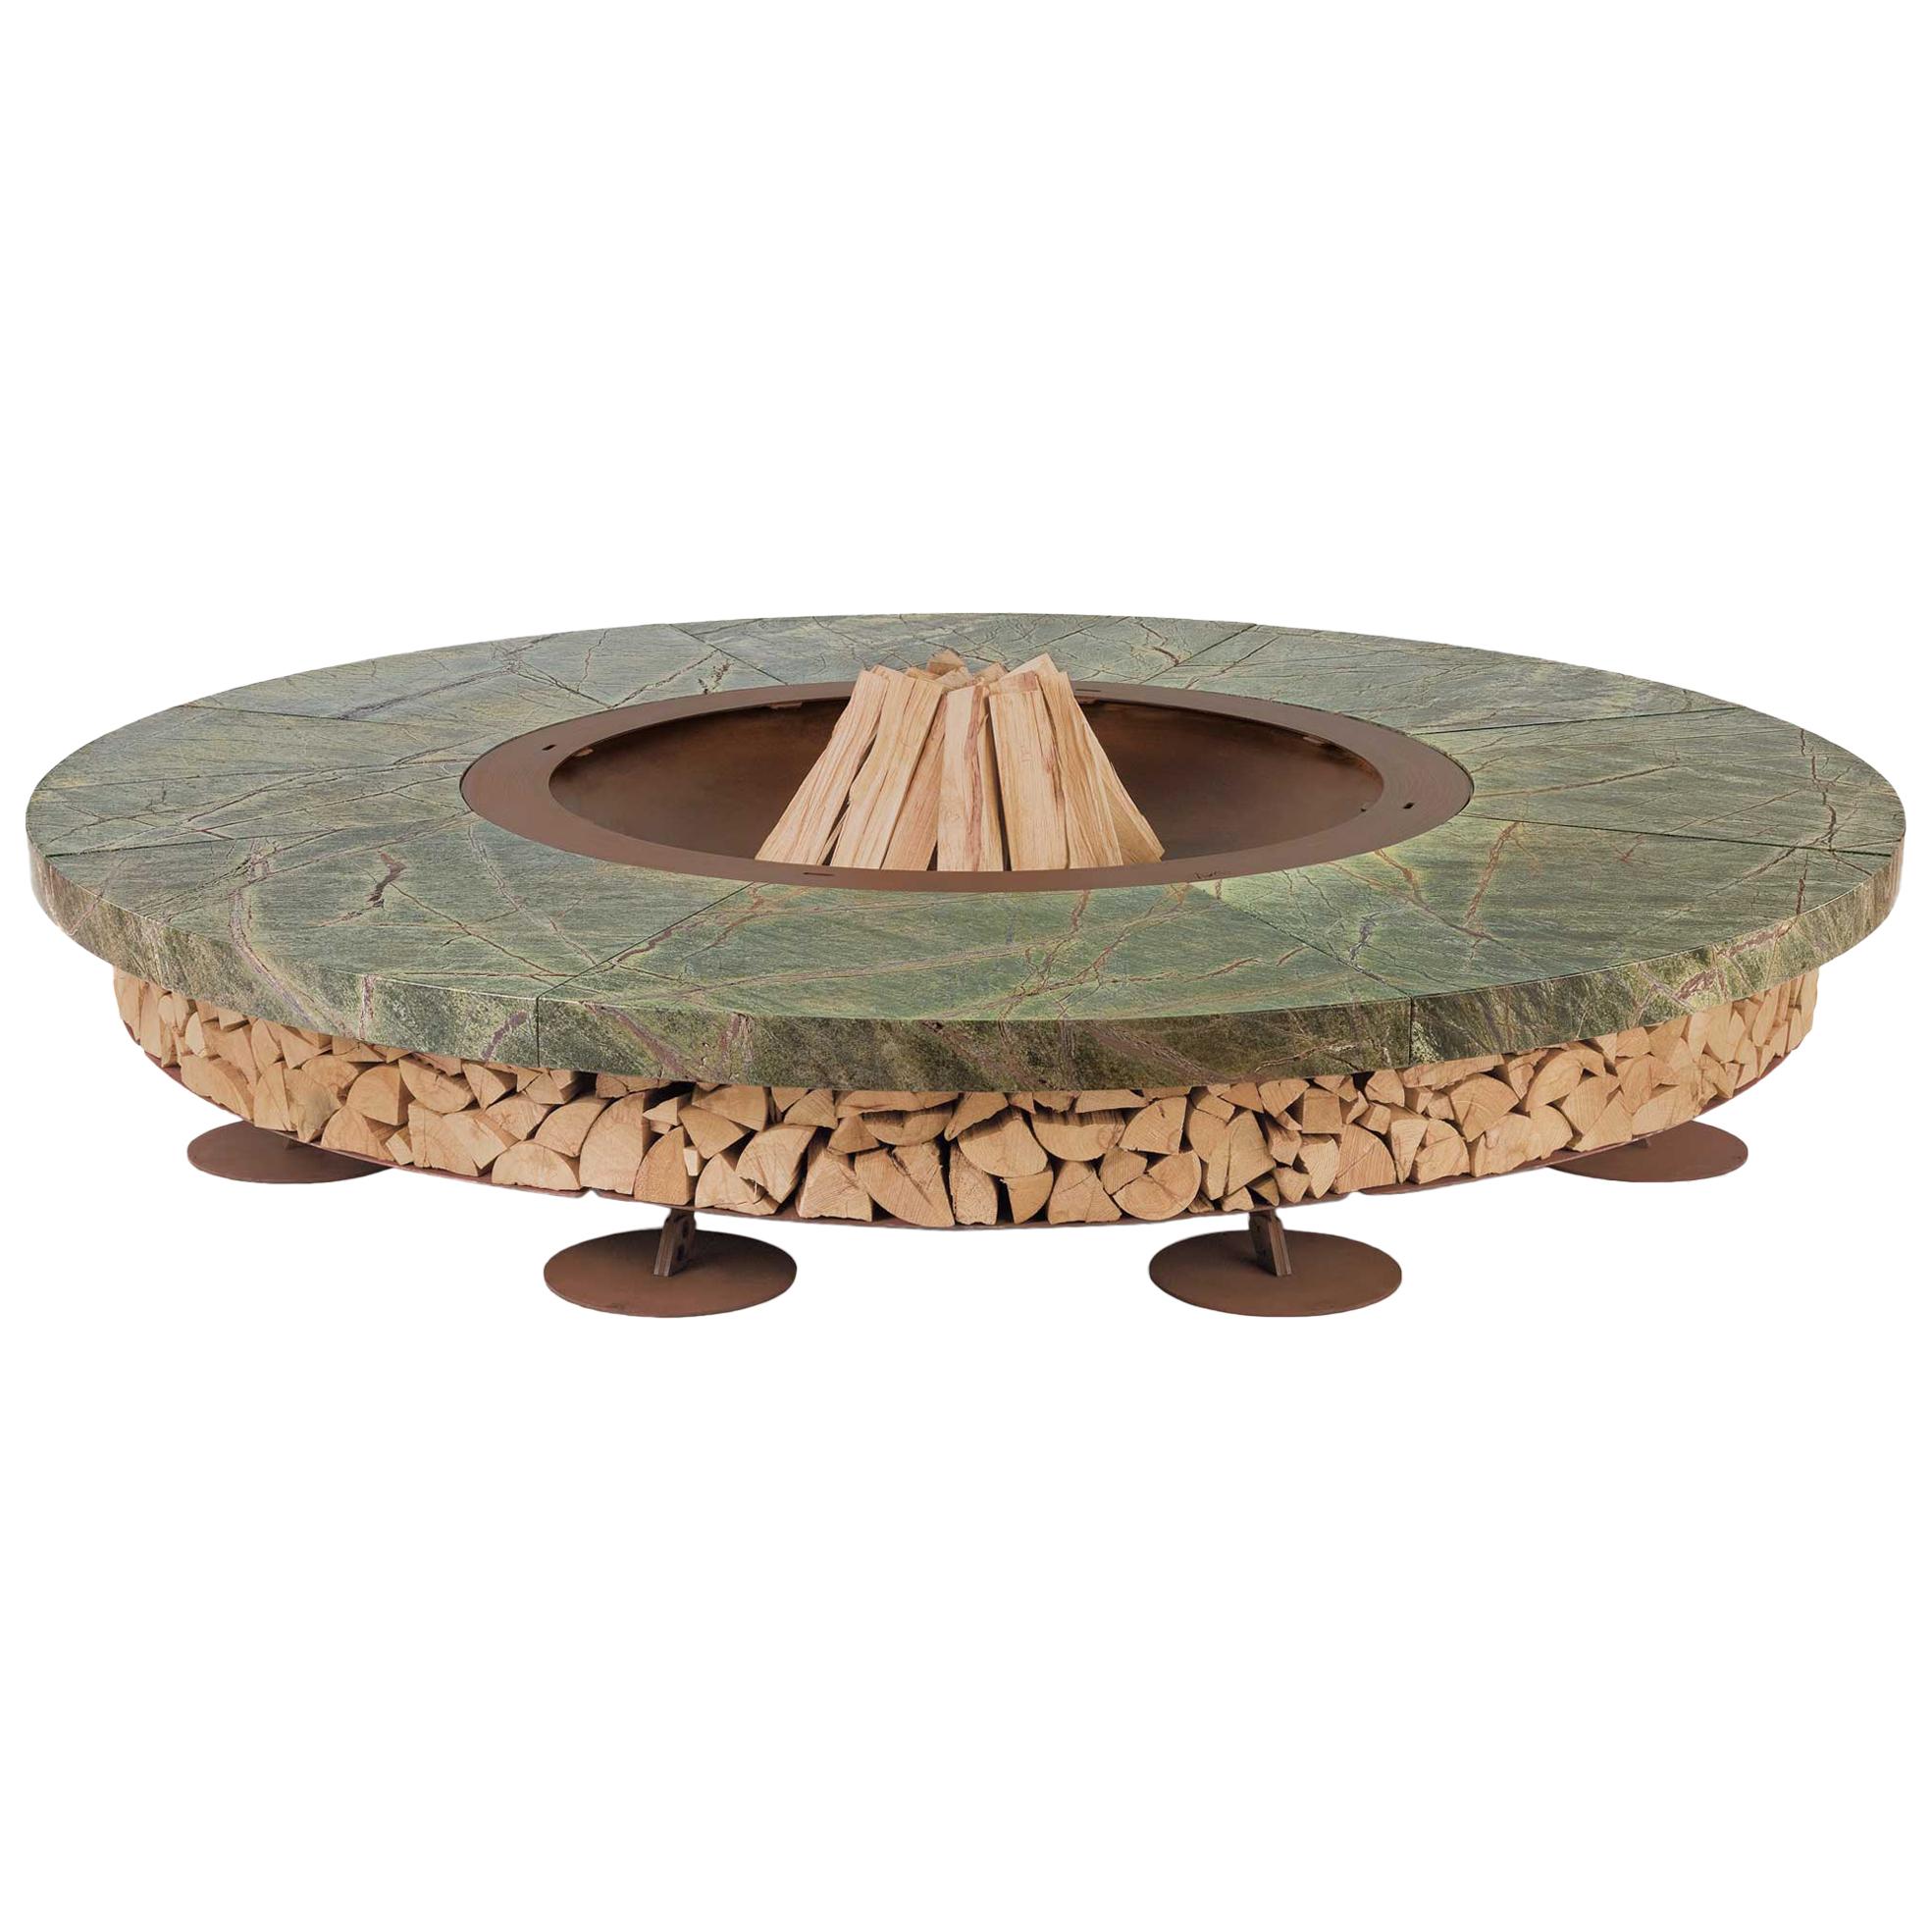 Ercole Large Rain Forest Green Marble Fire Pit by AK47 Design